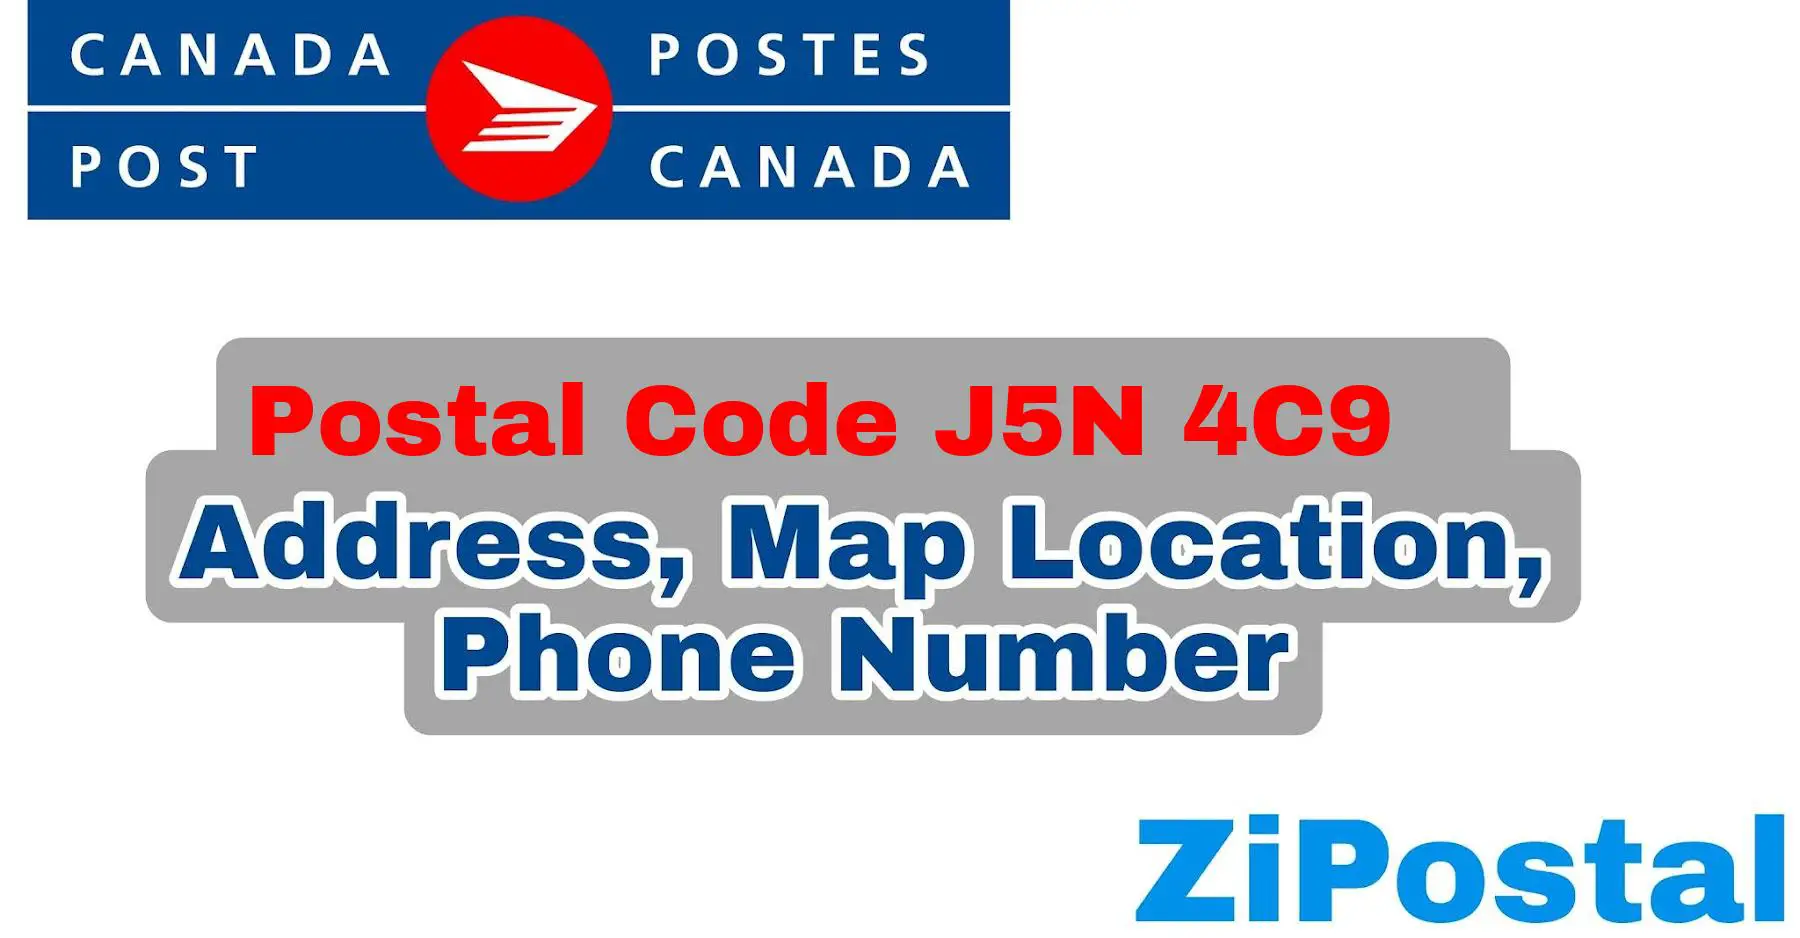 Postal Code J5N 4C9 Address Map Location and Phone Number